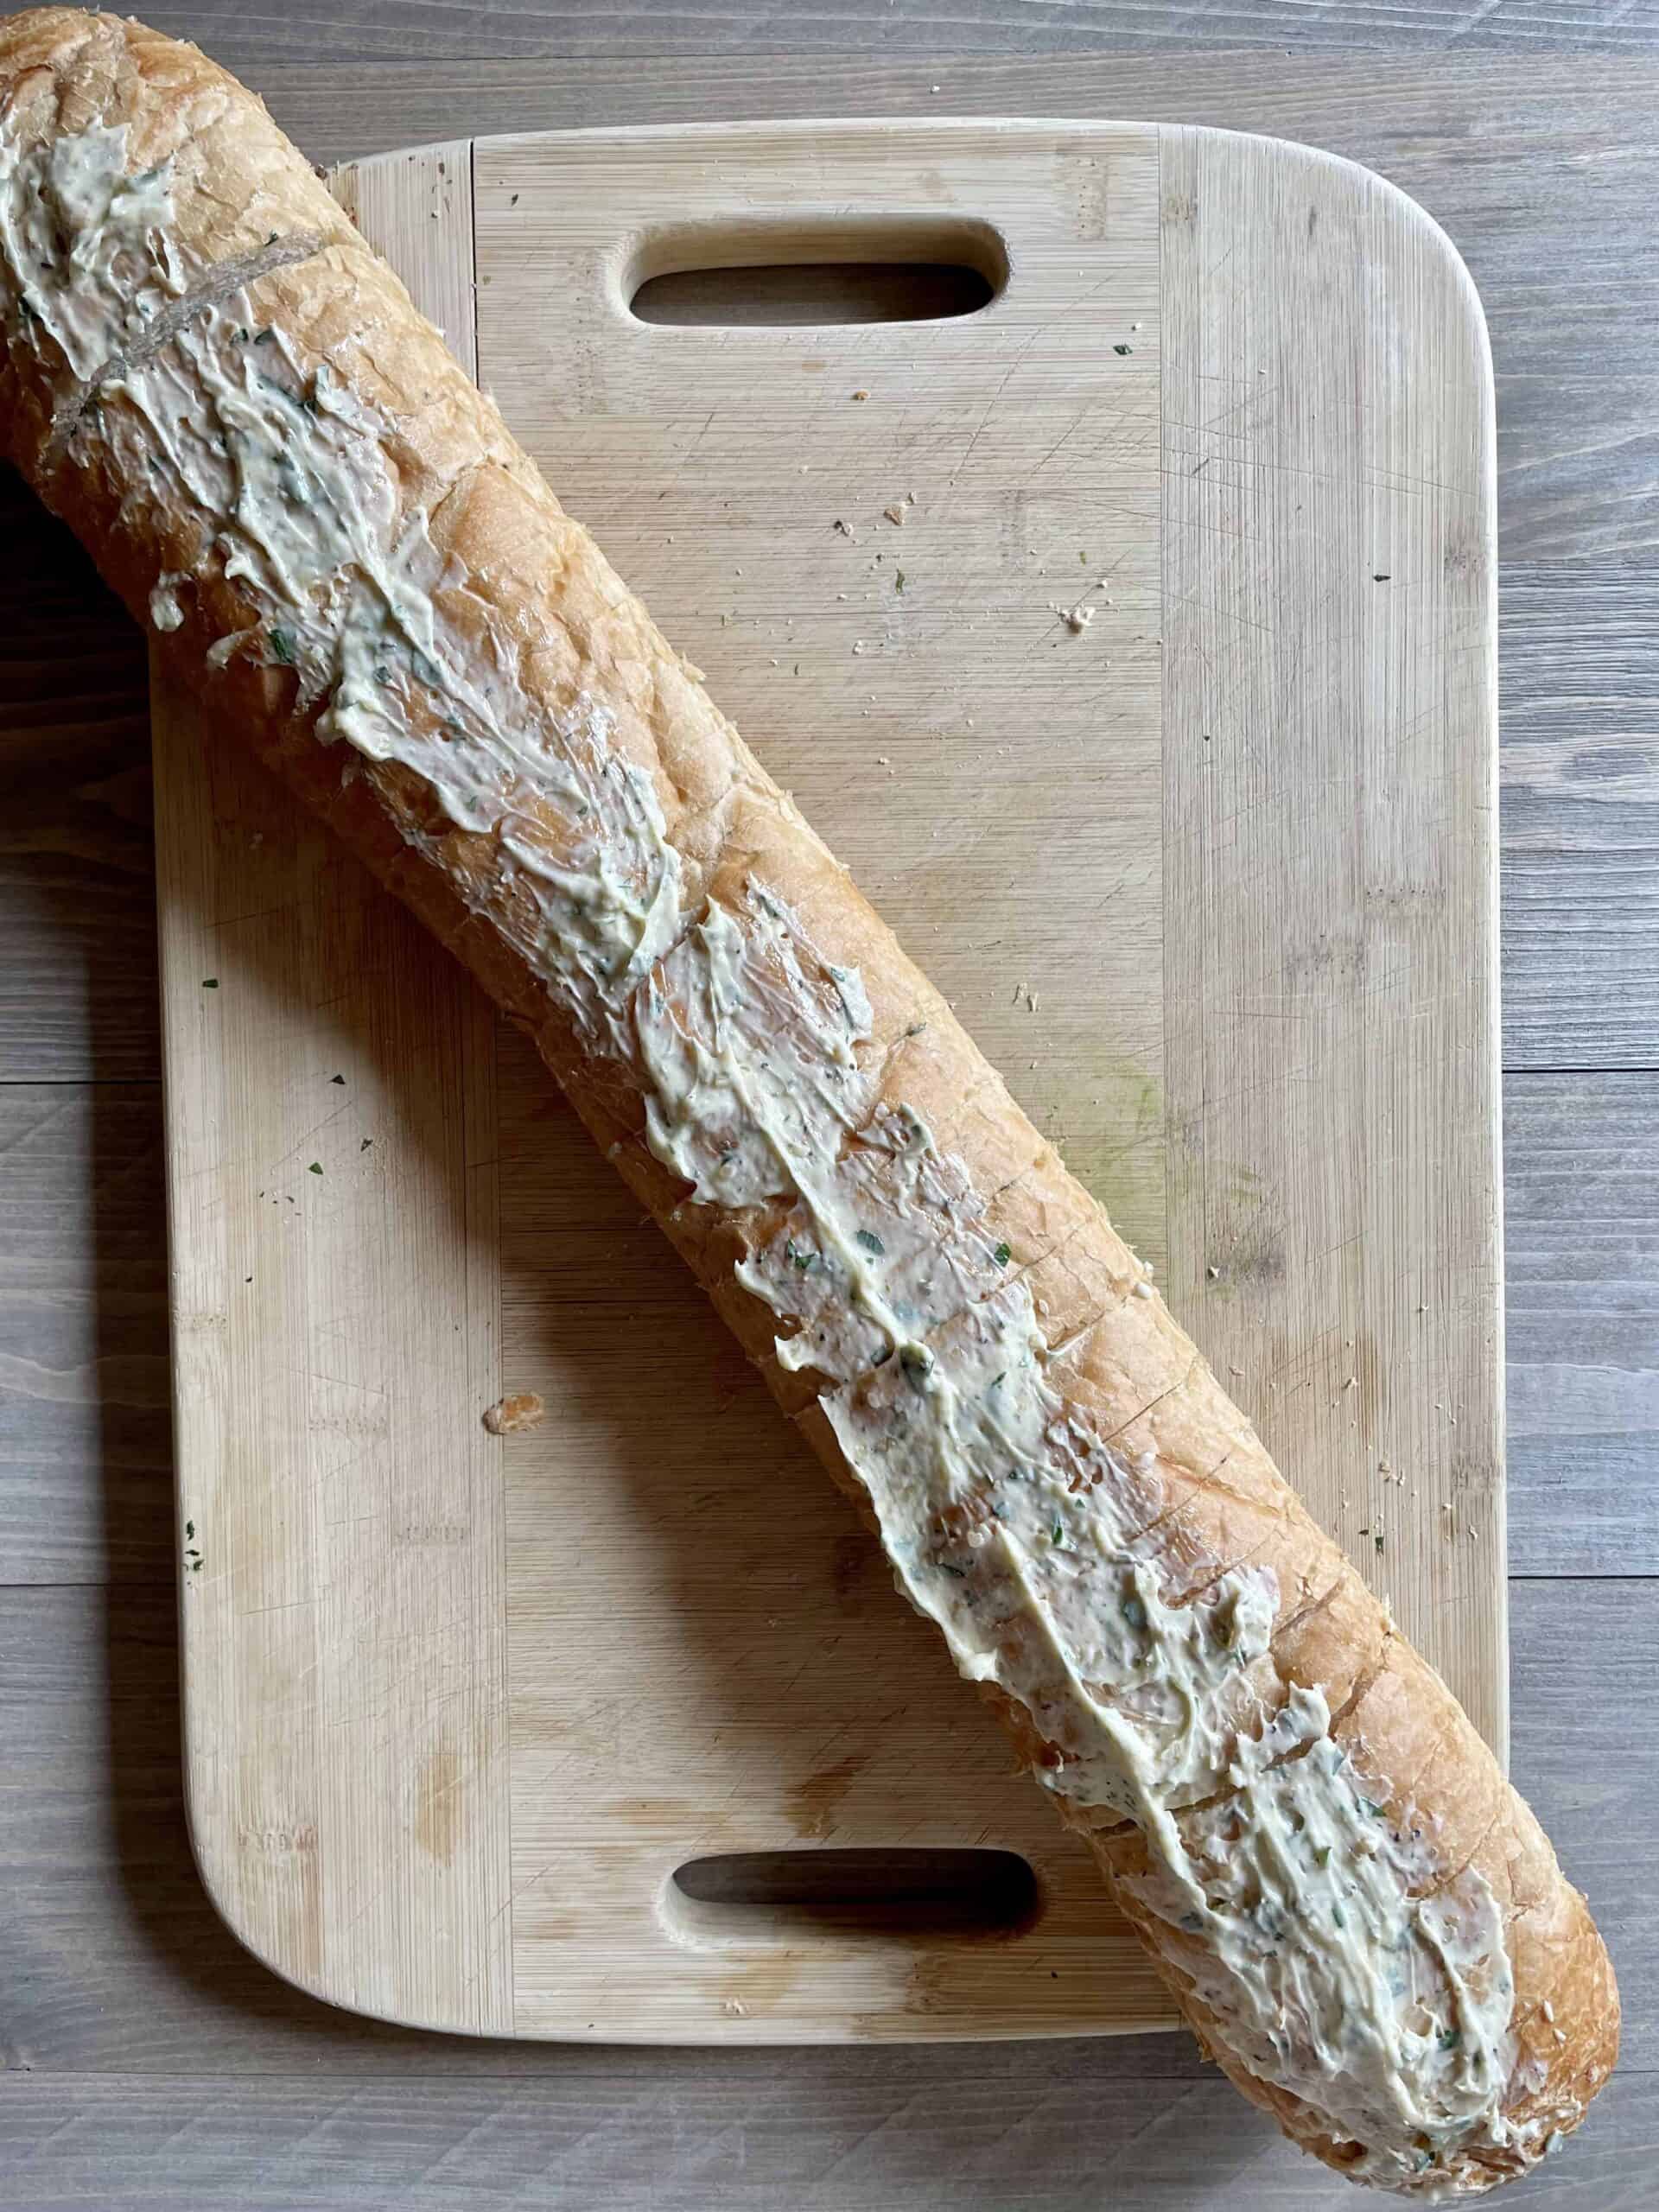 The loaf of vegan garlic bread is slathered with vegan garlic butter and laid out on a wooden cutting board.